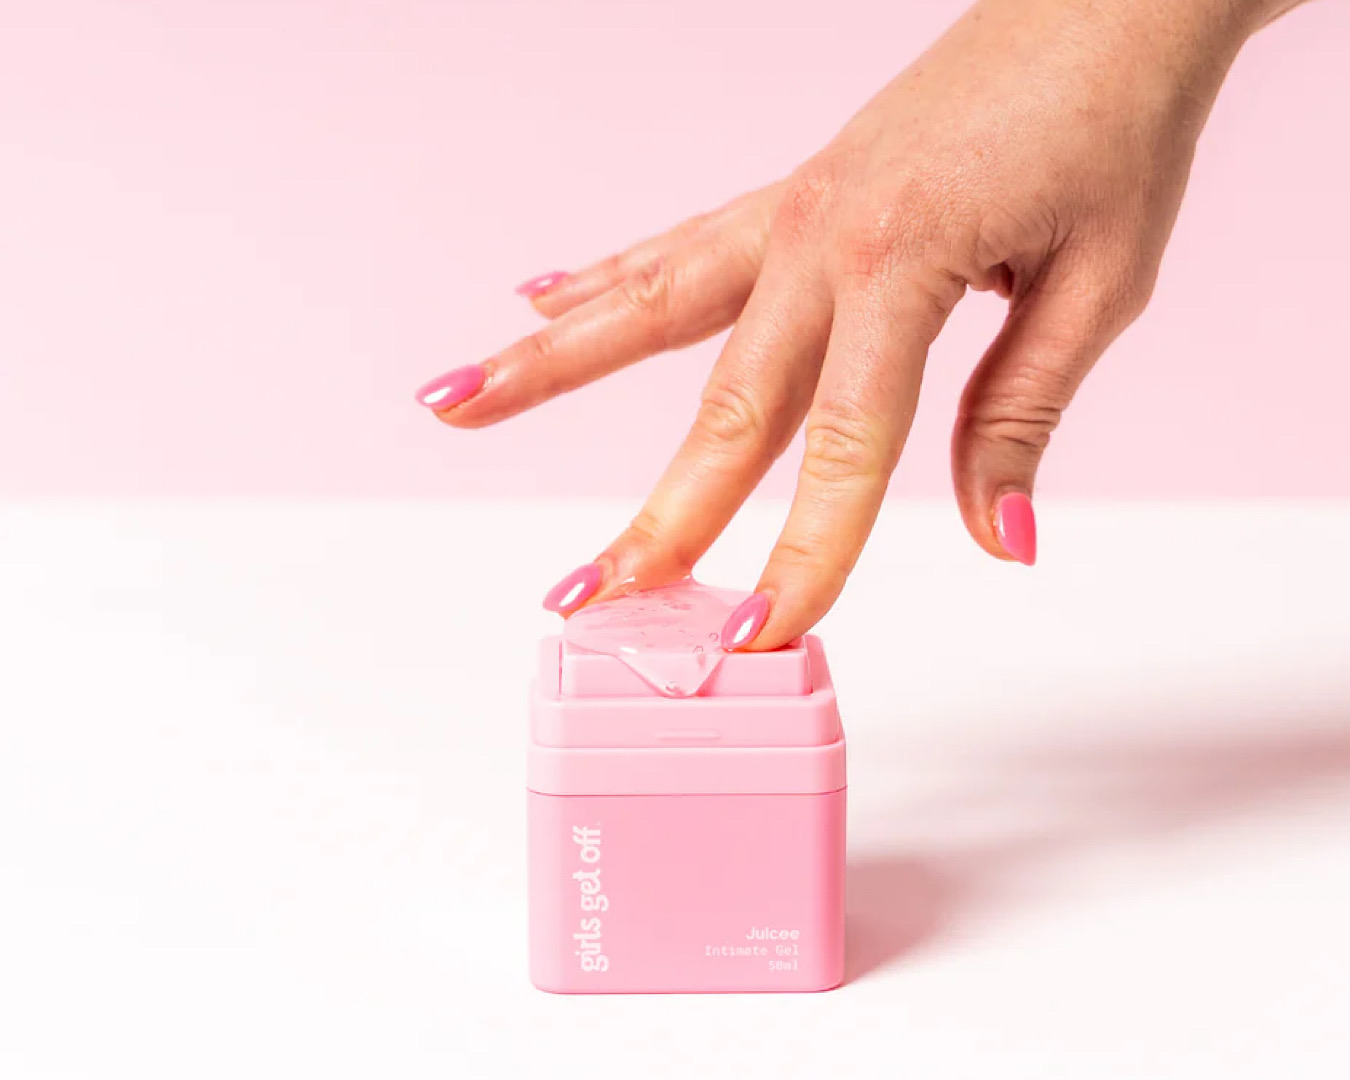 Somebody seductively spreads their fingers through some Juicee lube on the top of a pink container. 